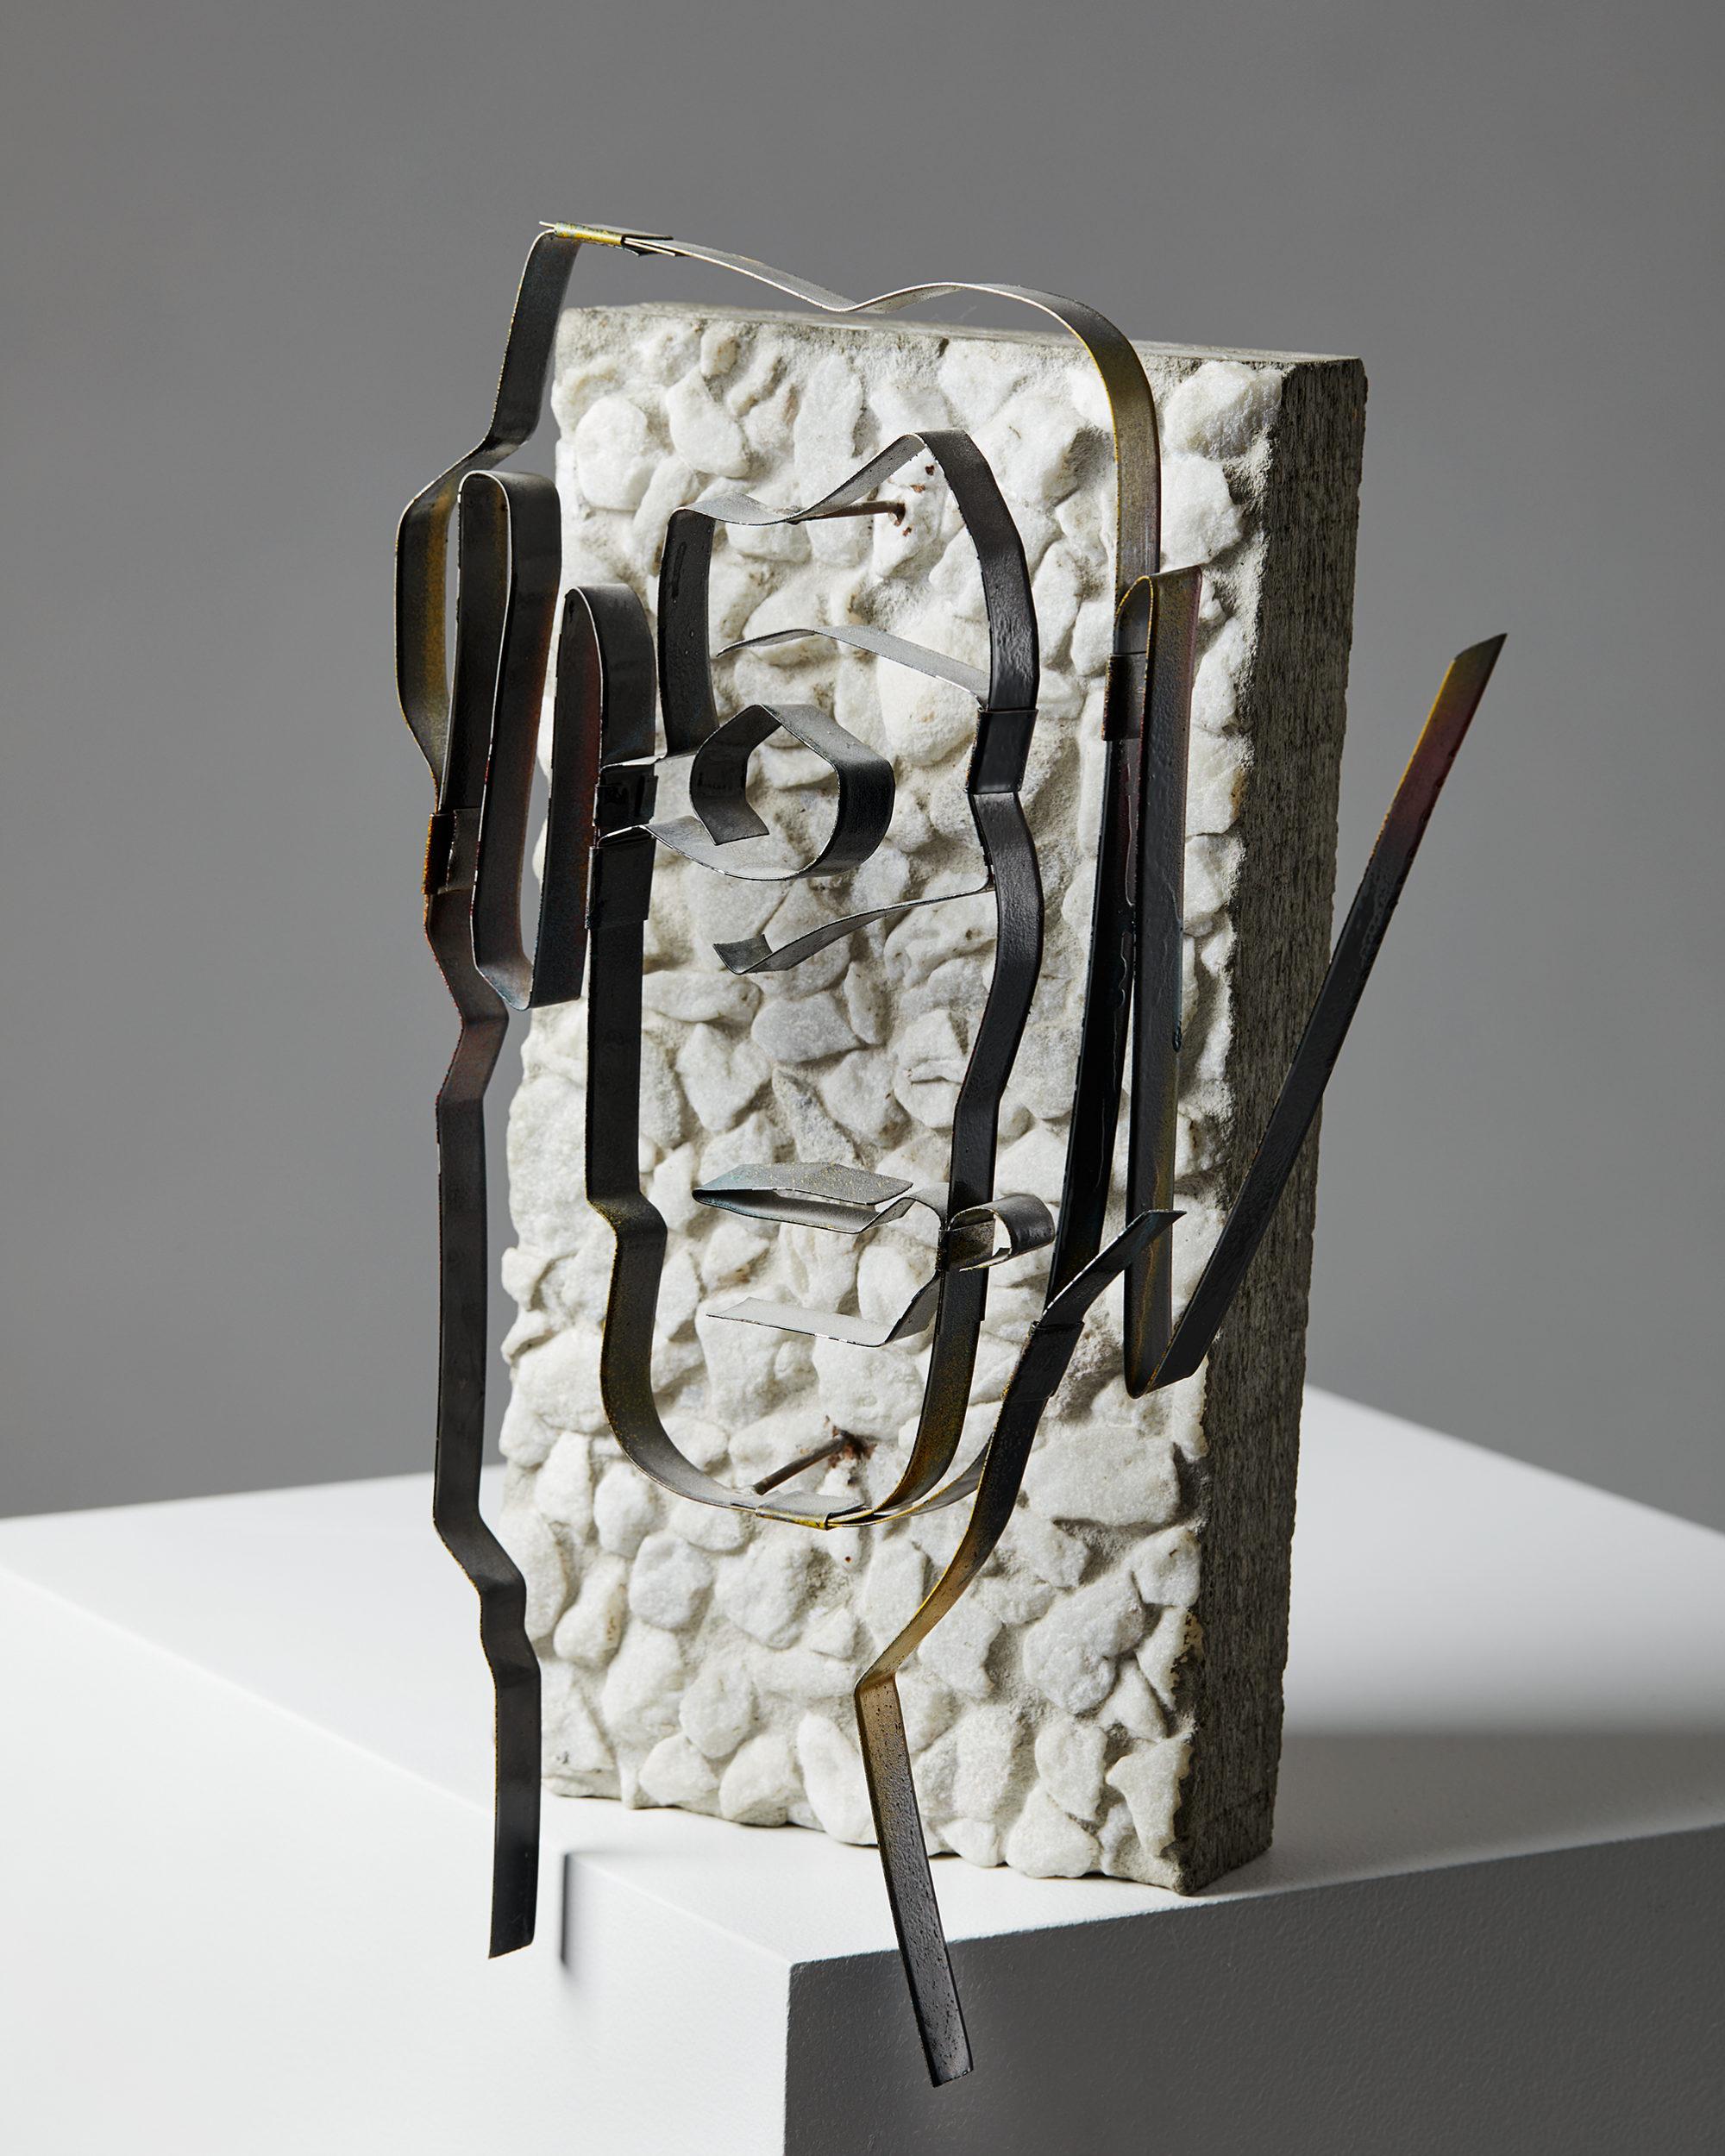 Wall sculpture face in relief designed by Siri Derkert, Sweden. 1966.
Made from lacquered metal offset and concrete inlayed with pebbles.

Measures: H: 34.5 cm / 13 1/2